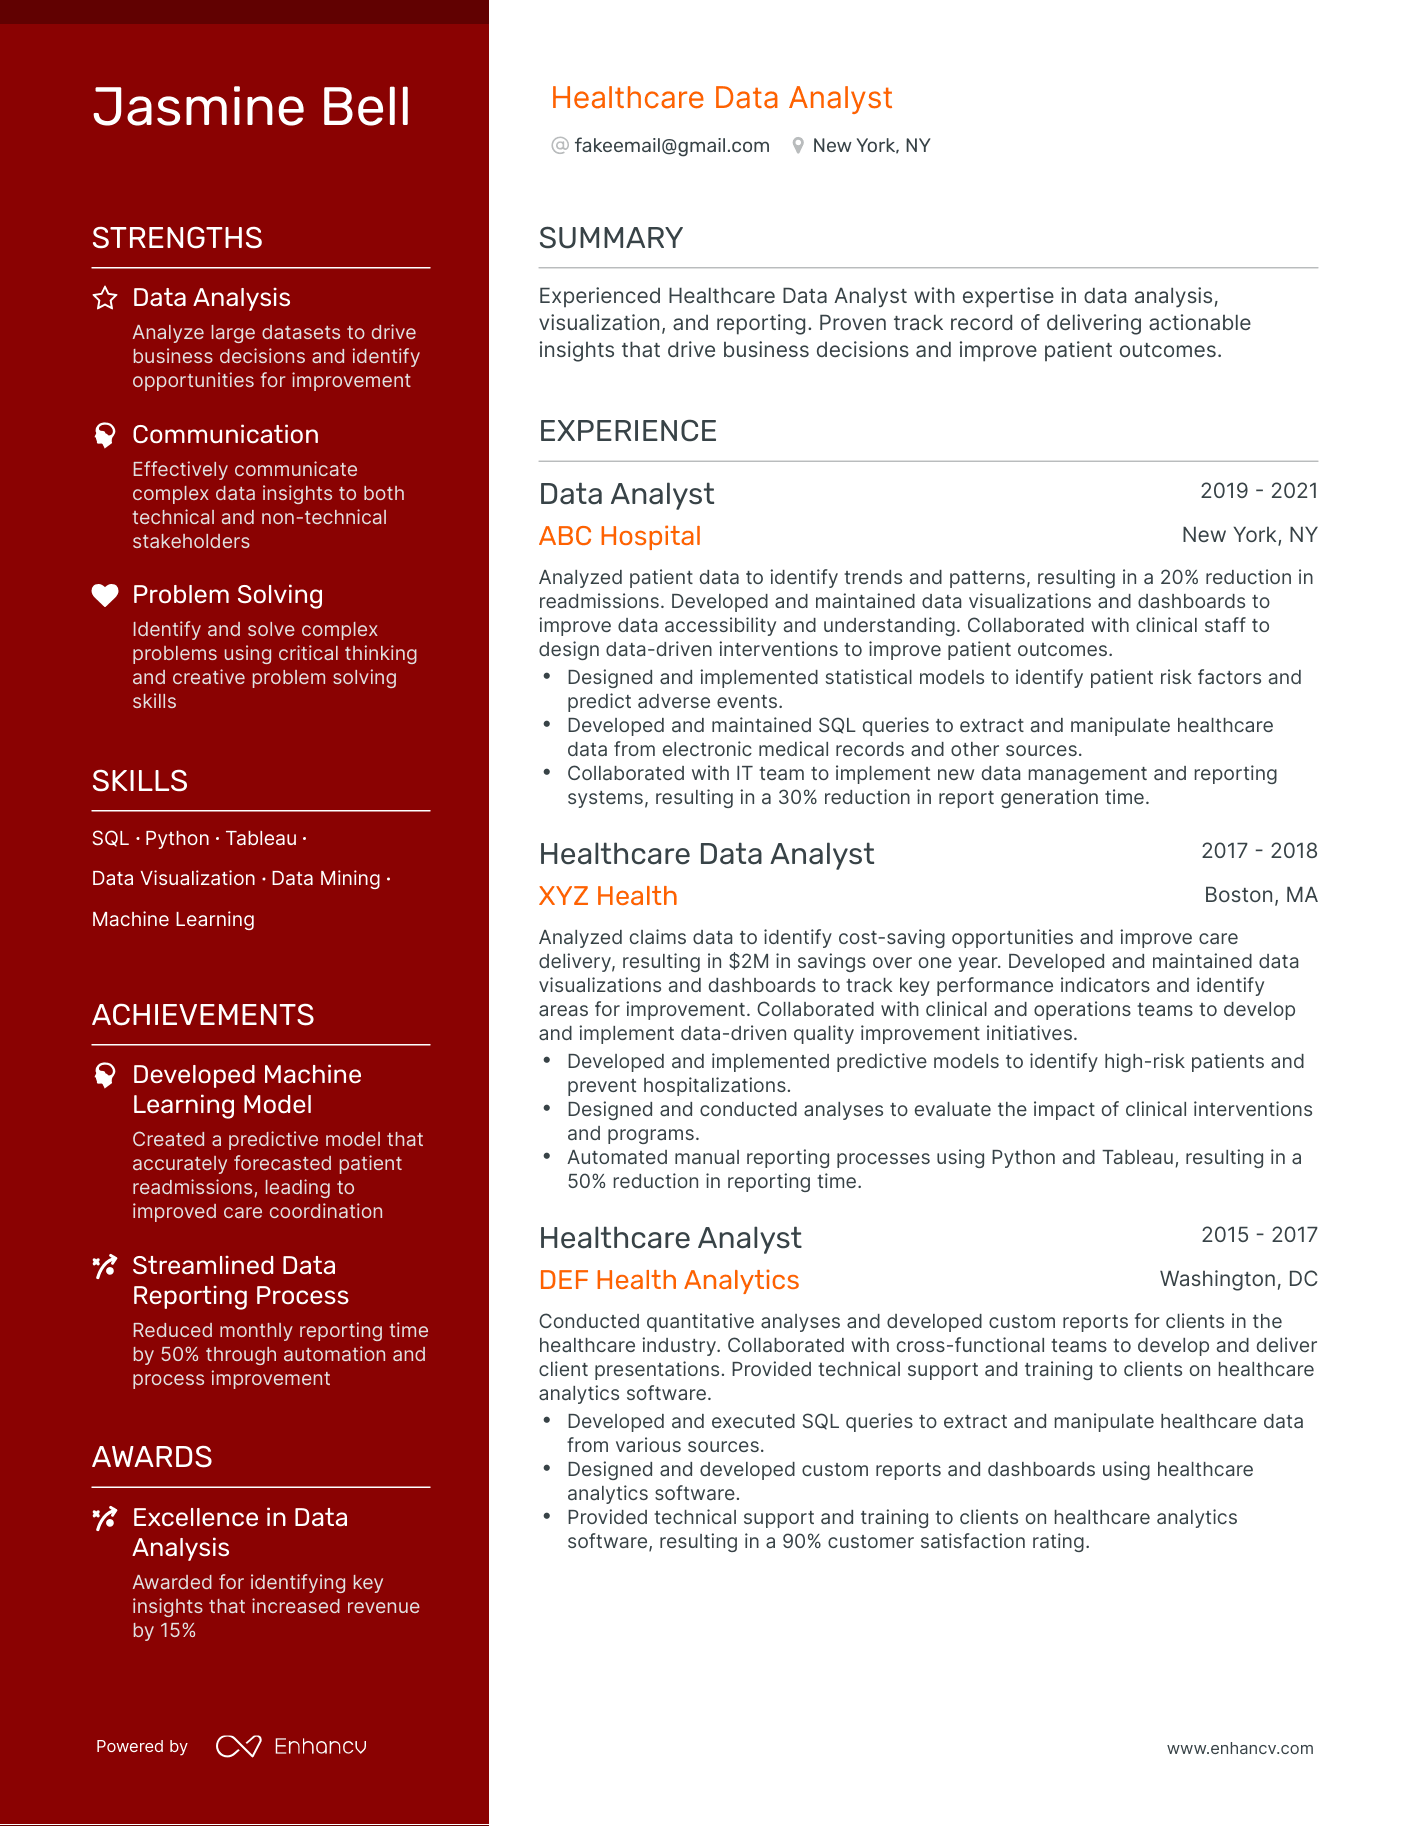 Polished Healthcare Data Analyst Resume Template